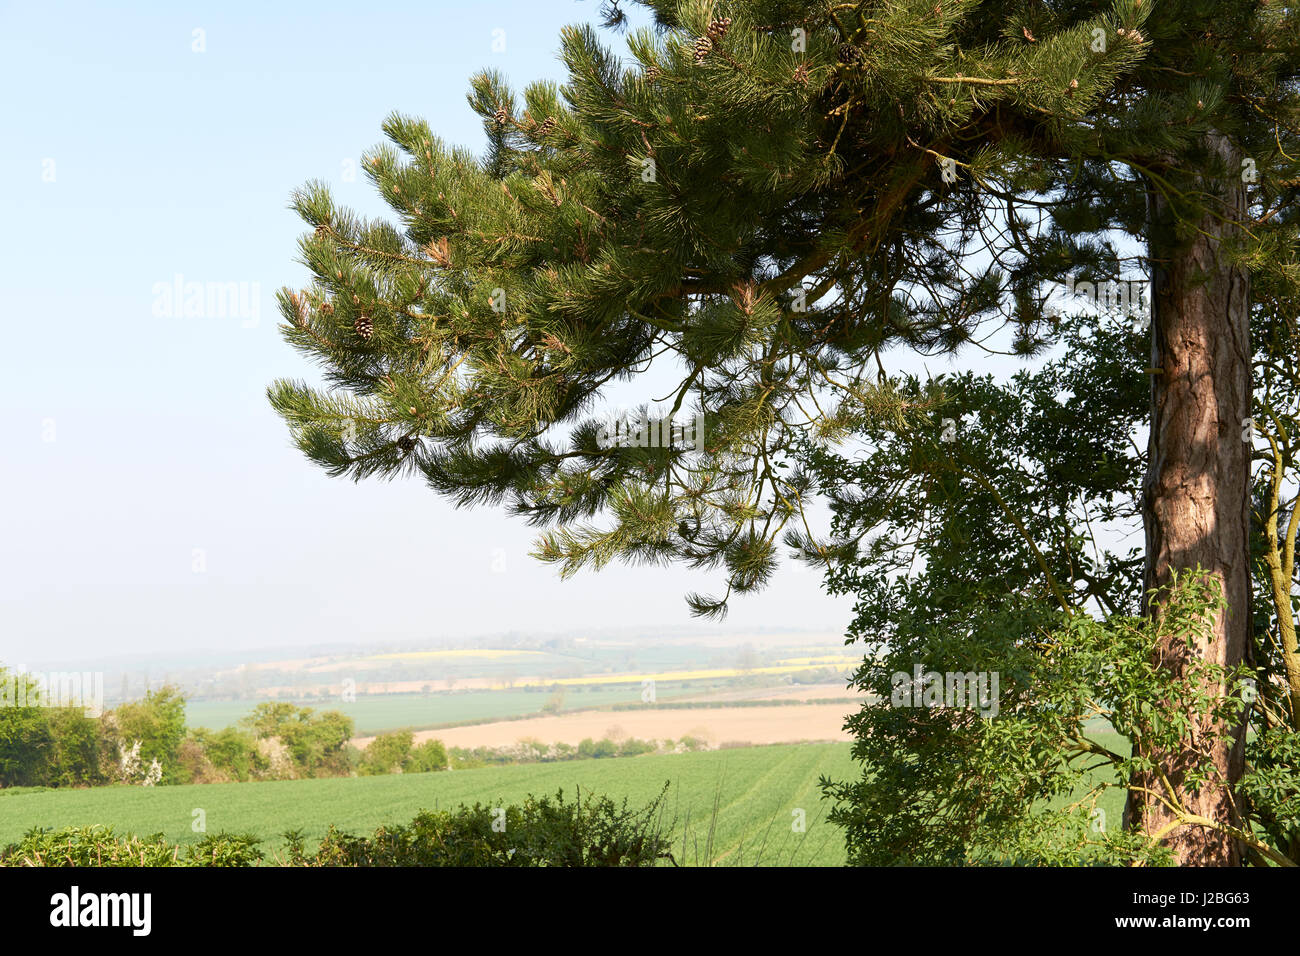 A Scots Pine (Pinus sylvestris) tree with pine cones, open farmland and countryside view in background. Bedfordshire, UK. Stock Photo